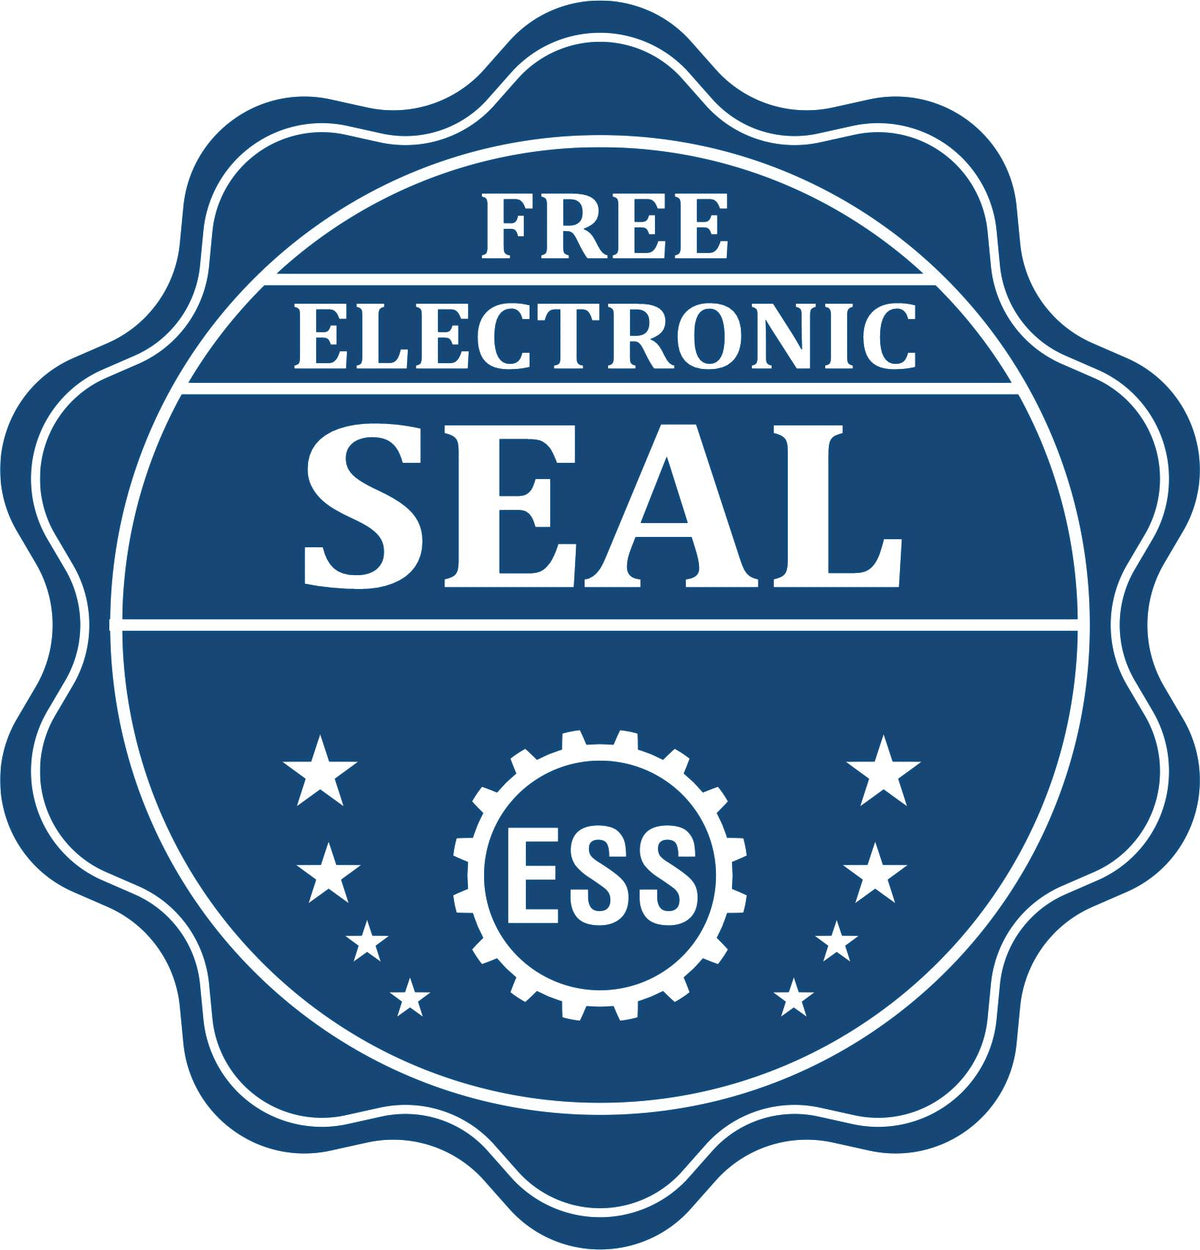 A badge showing a free electronic seal for the Extended Long Reach Kentucky Surveyor Embosser with stars and the ESS gear on the emblem.